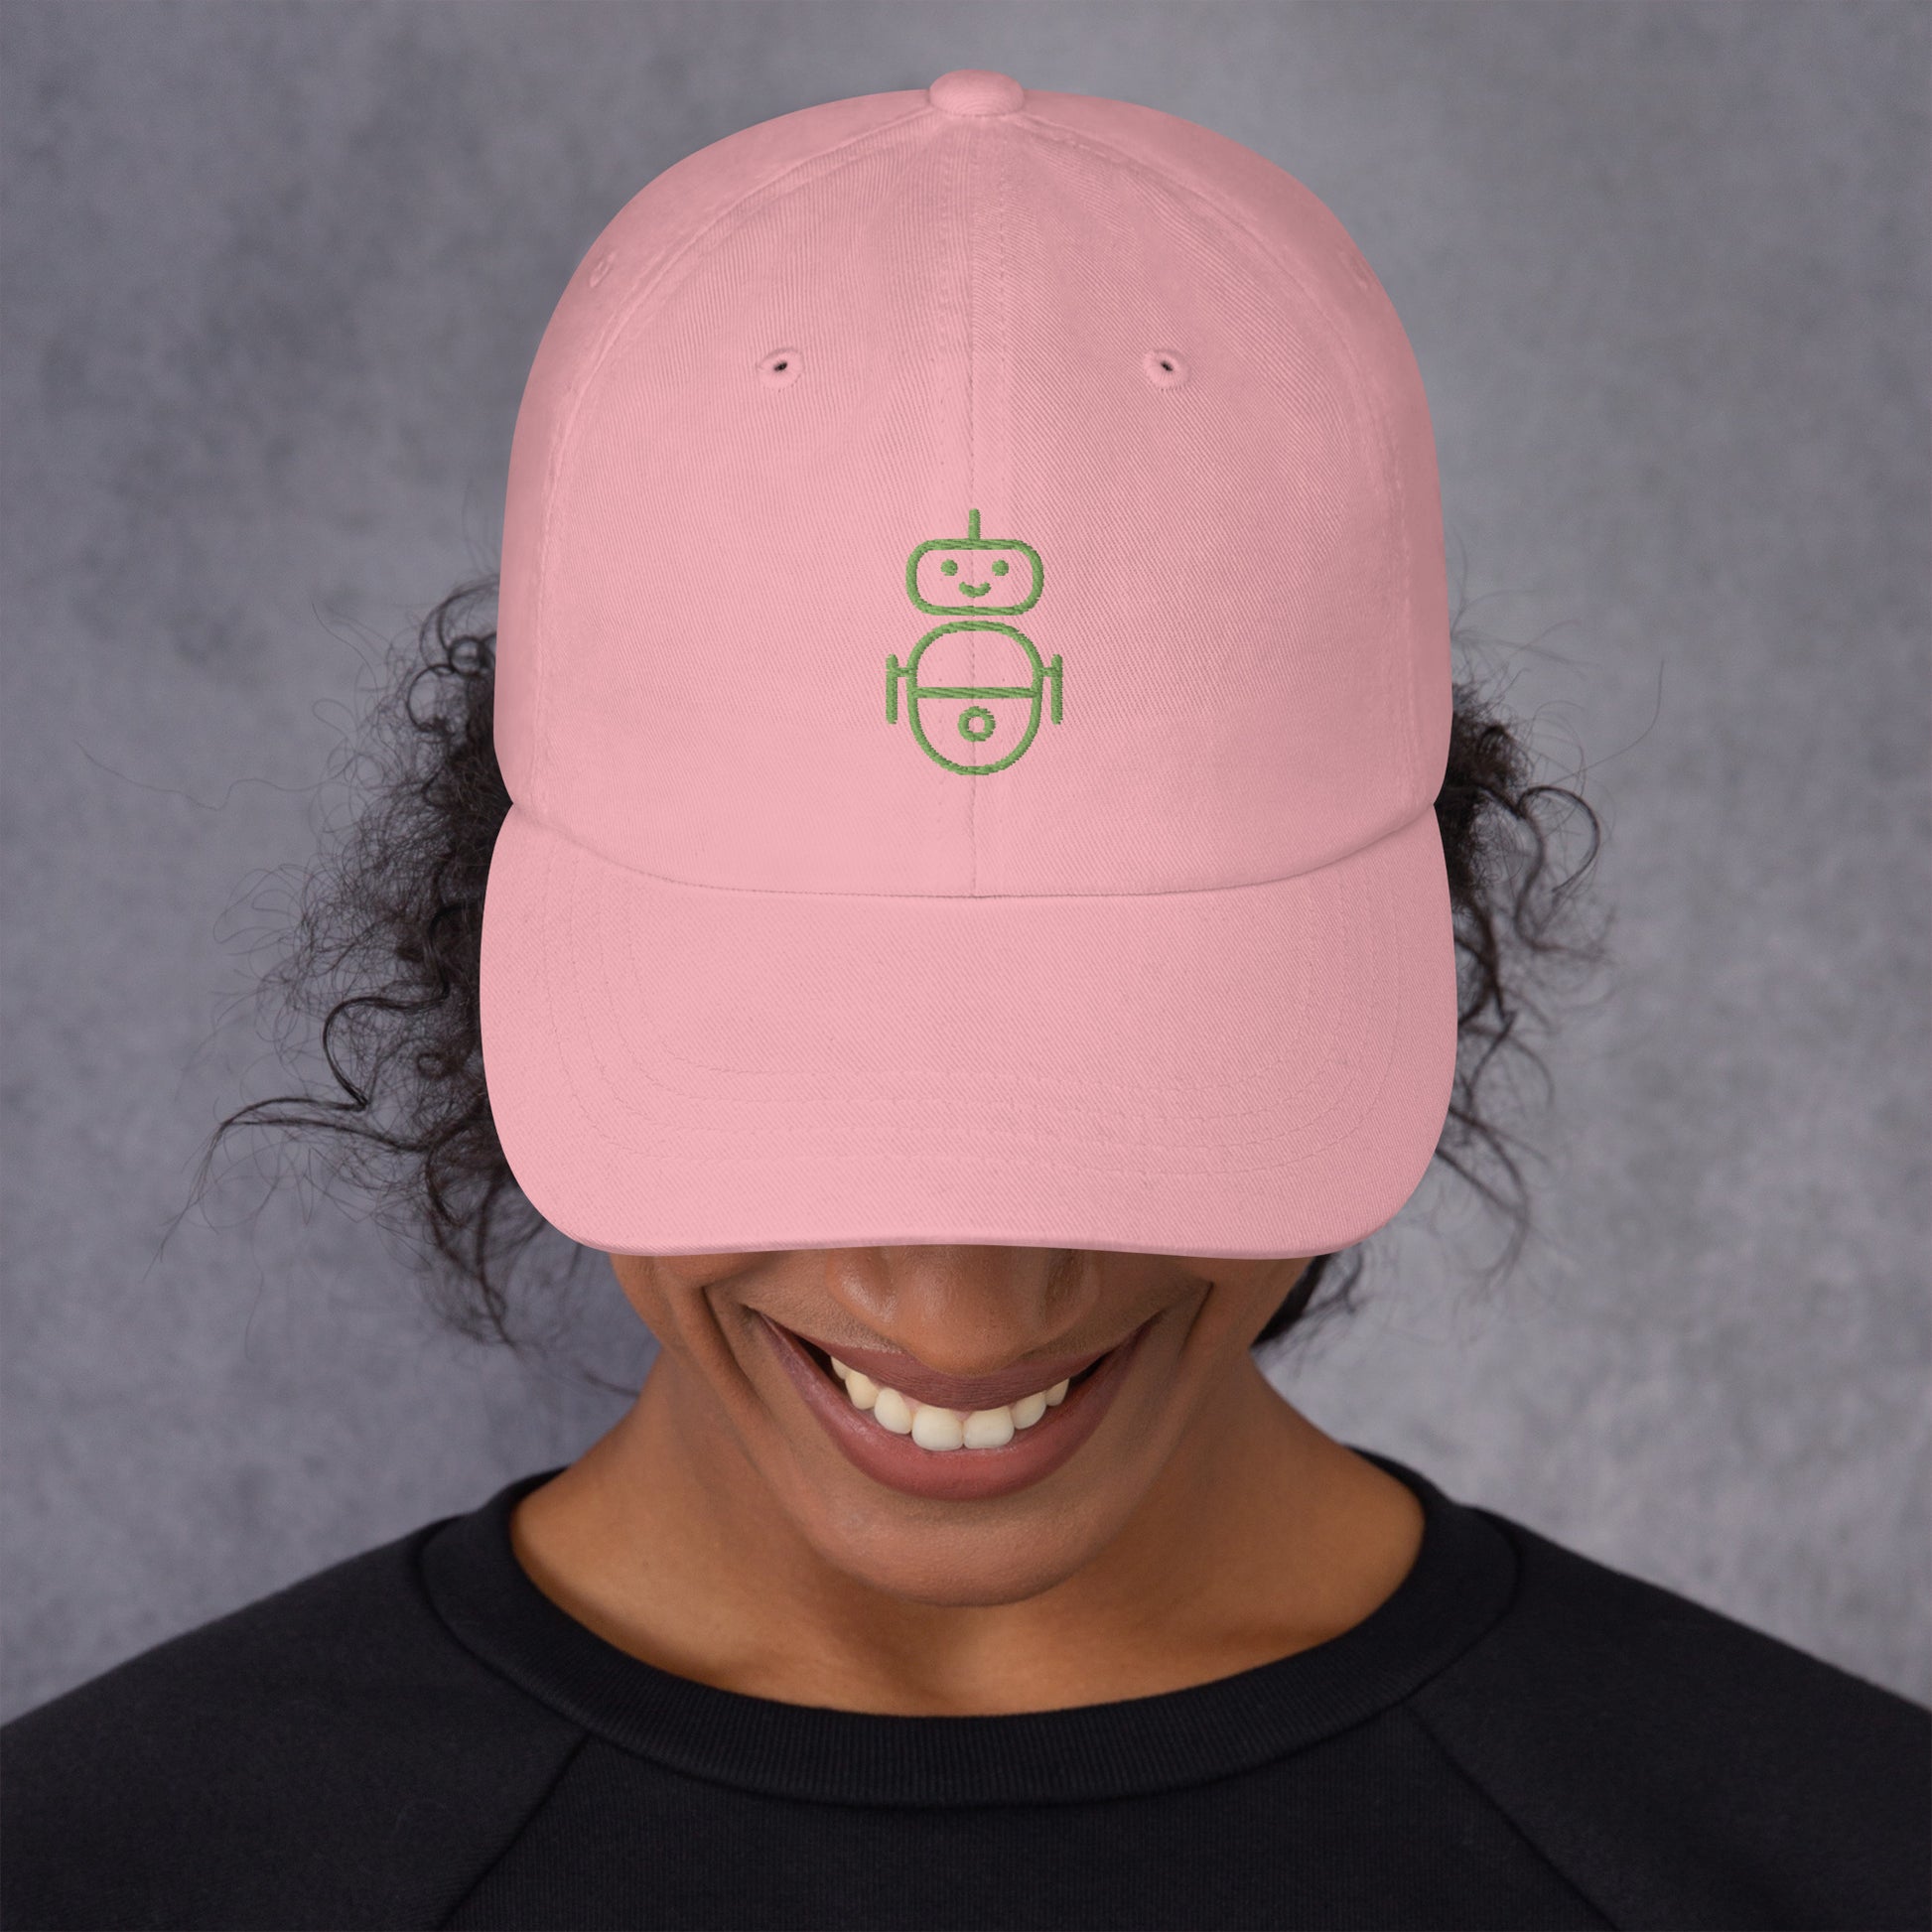 Women with pink hat with in green Android logo